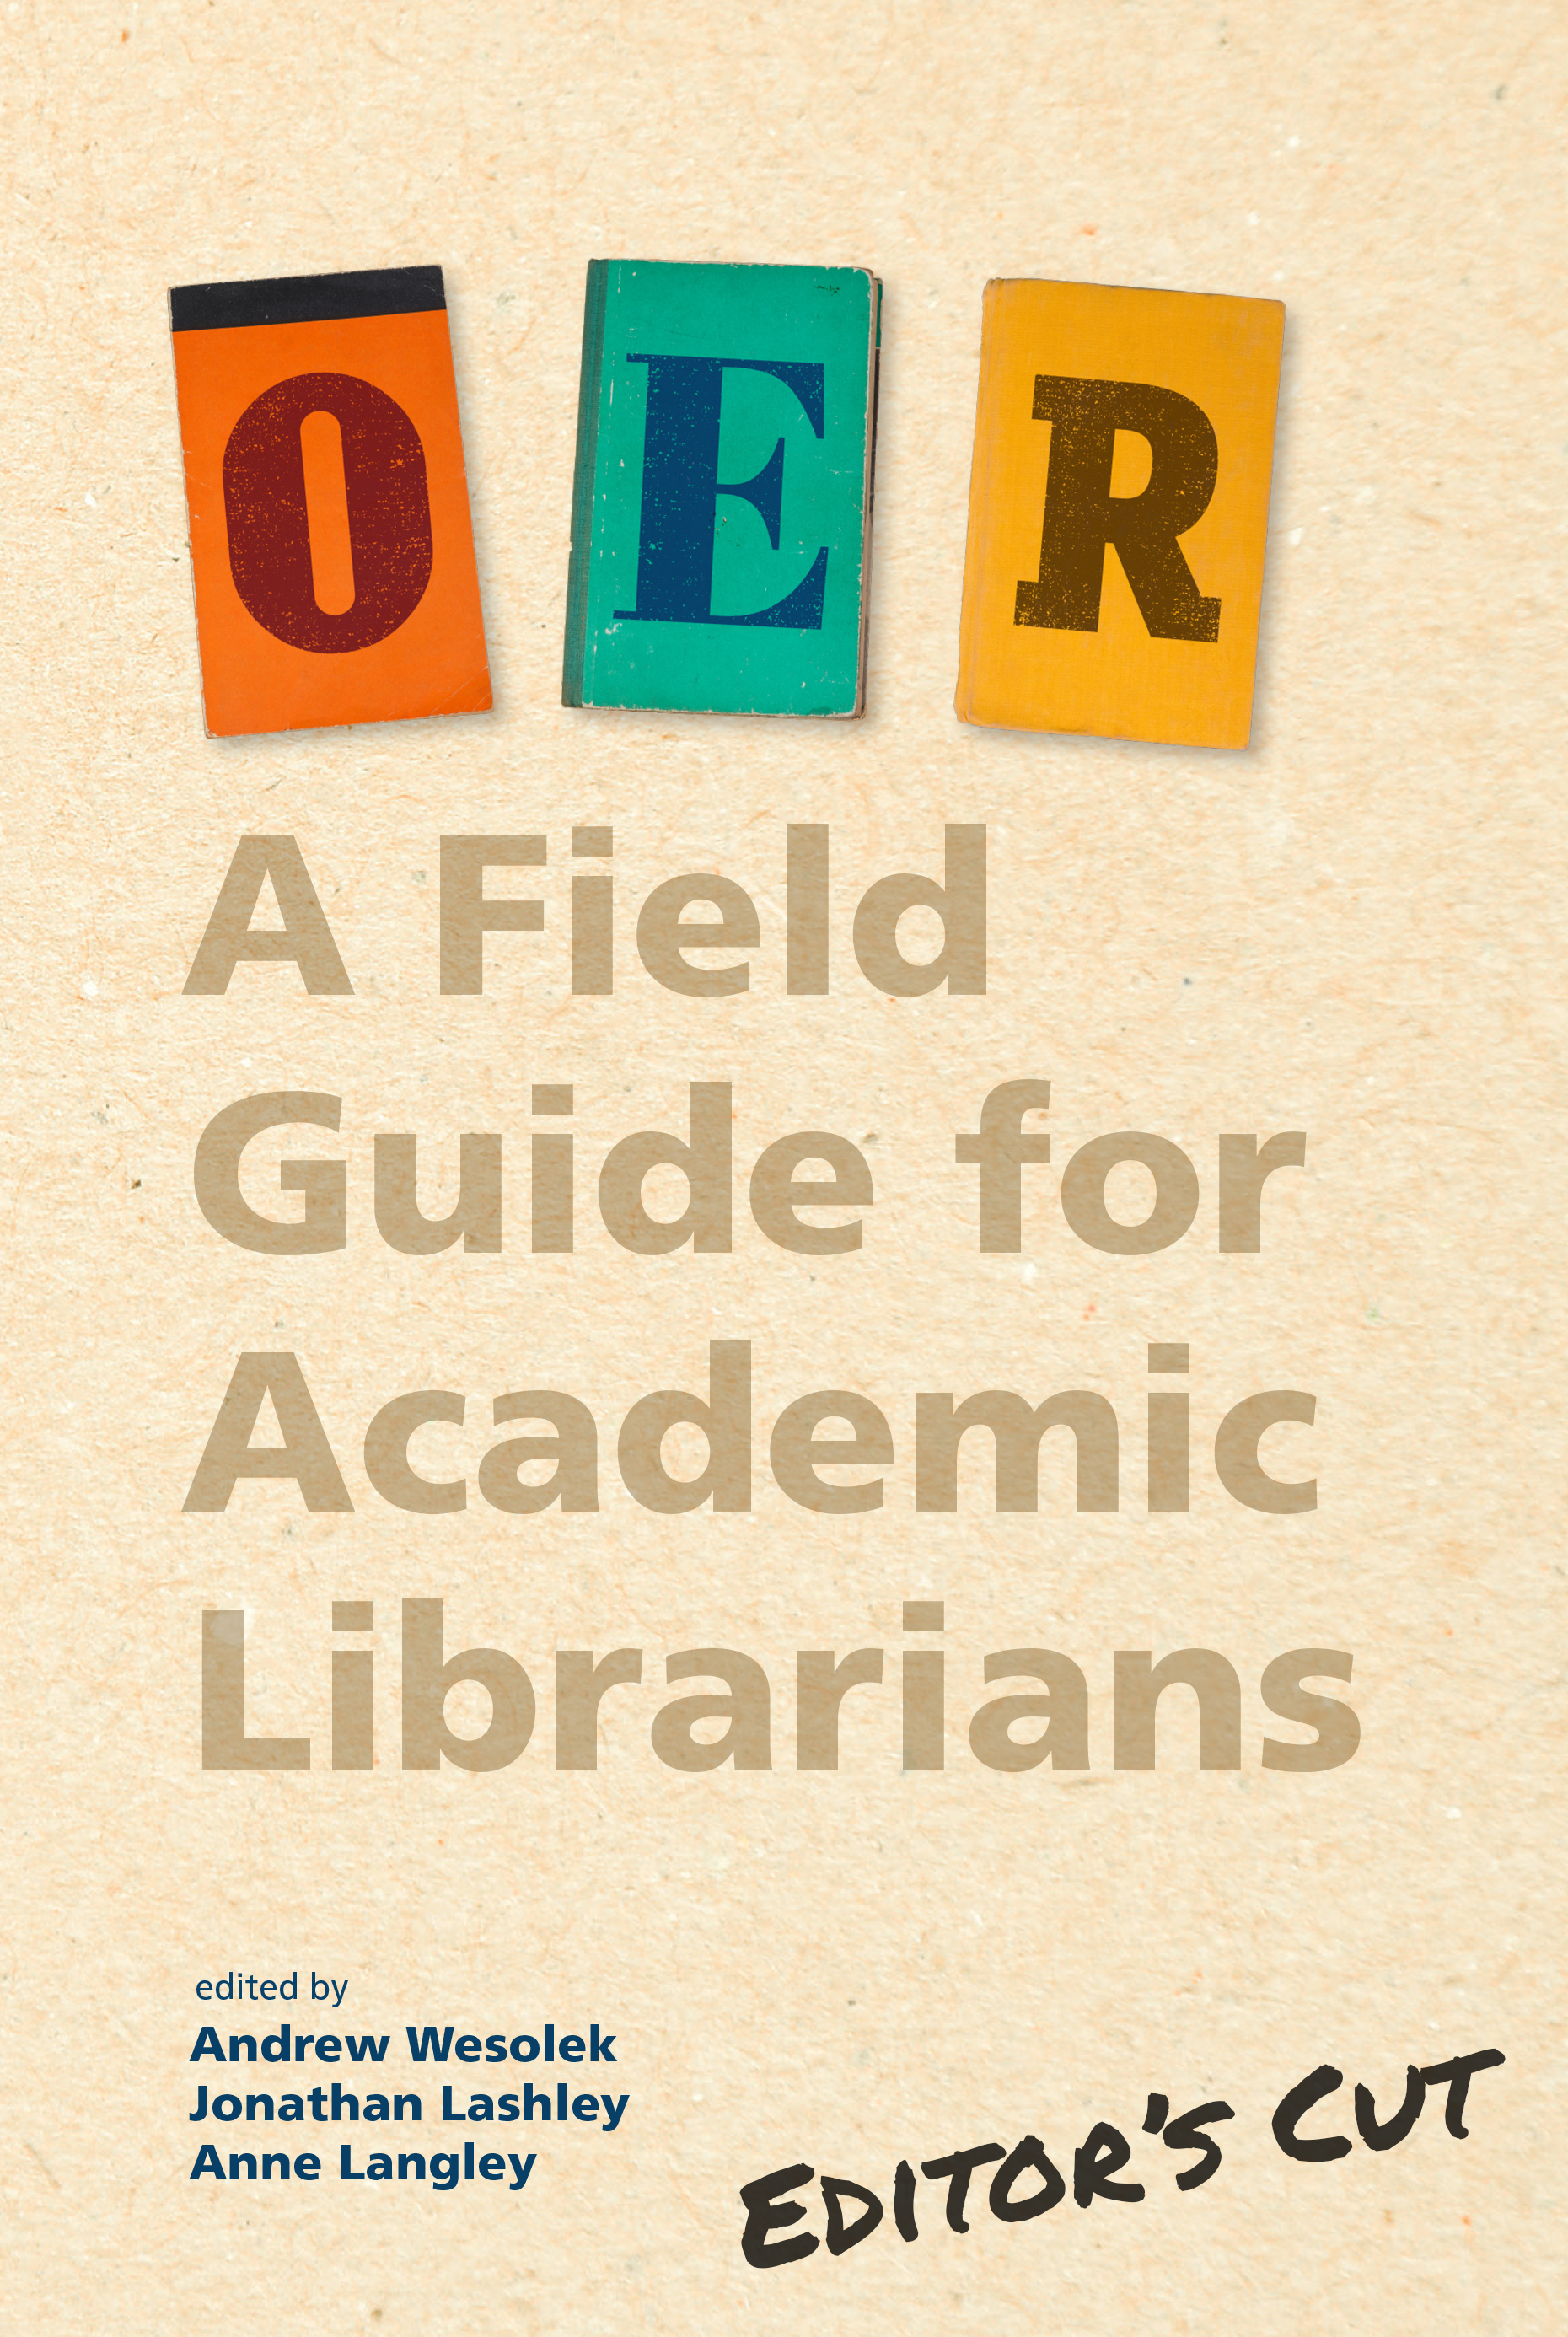 Cover image for OER: A Field Guide for Academic Librarians | Editor's Cut